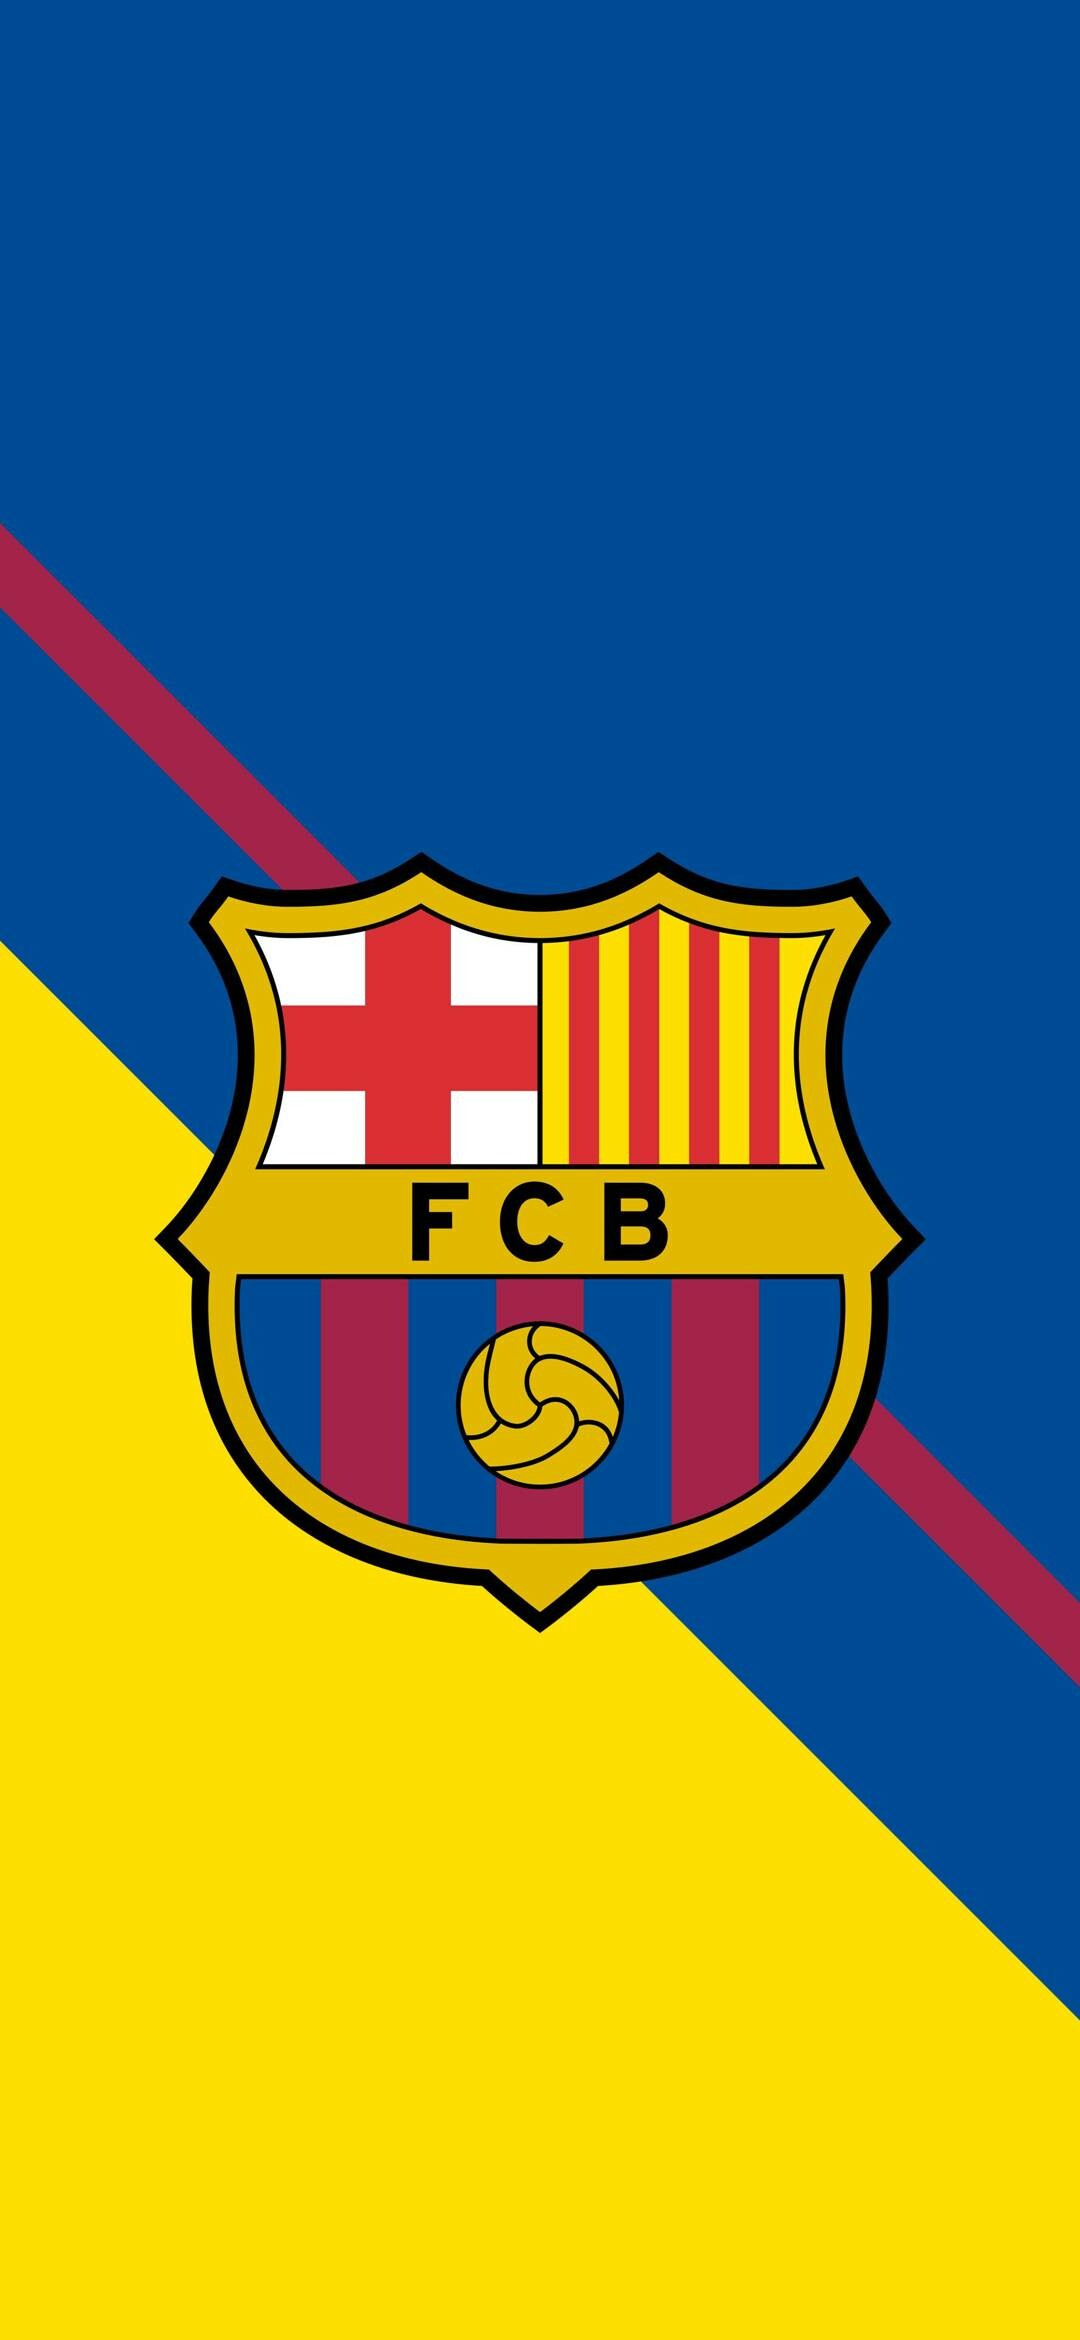 FC Barcelona: The club has a long-standing rivalry with Real Madrid, "El Clasico". 1080x2340 HD Background.